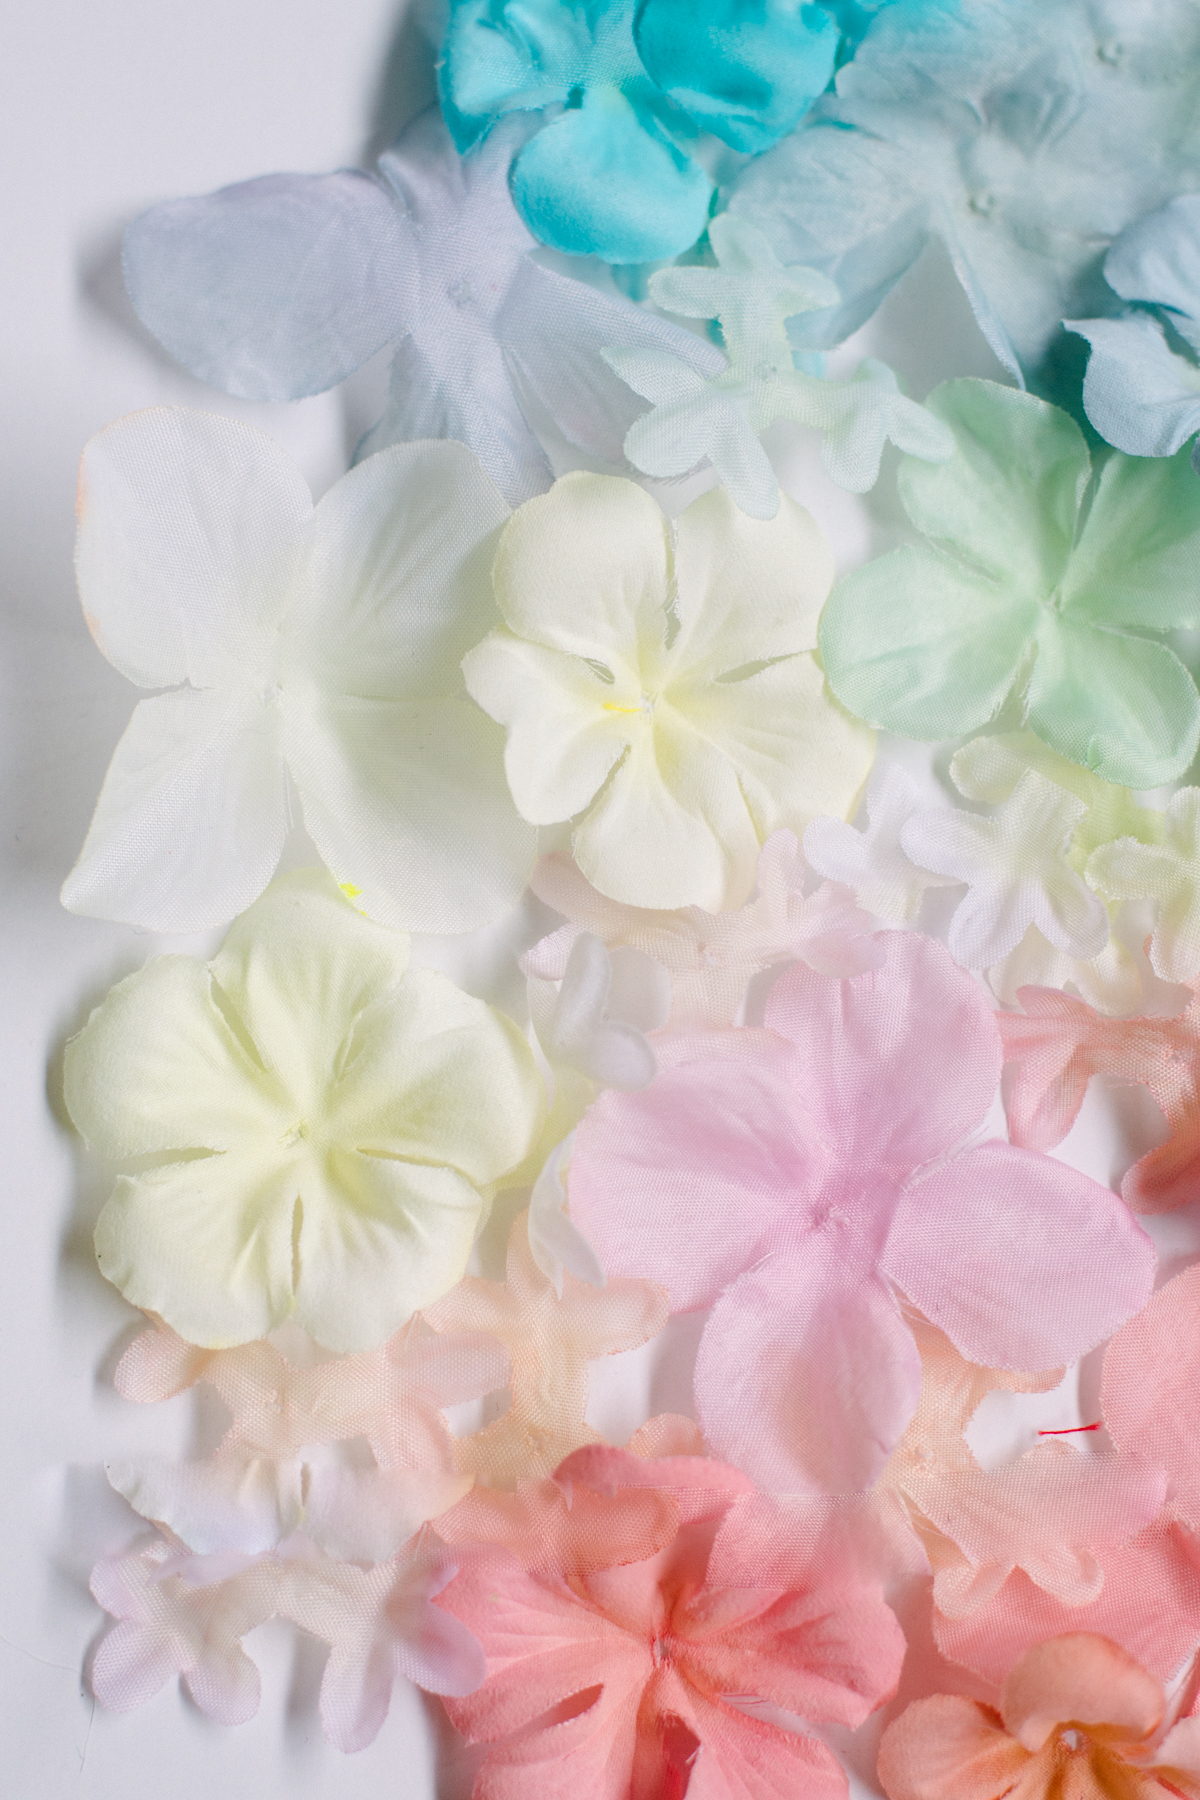 Close up of fabric flowers that have been dyed using Rit dye